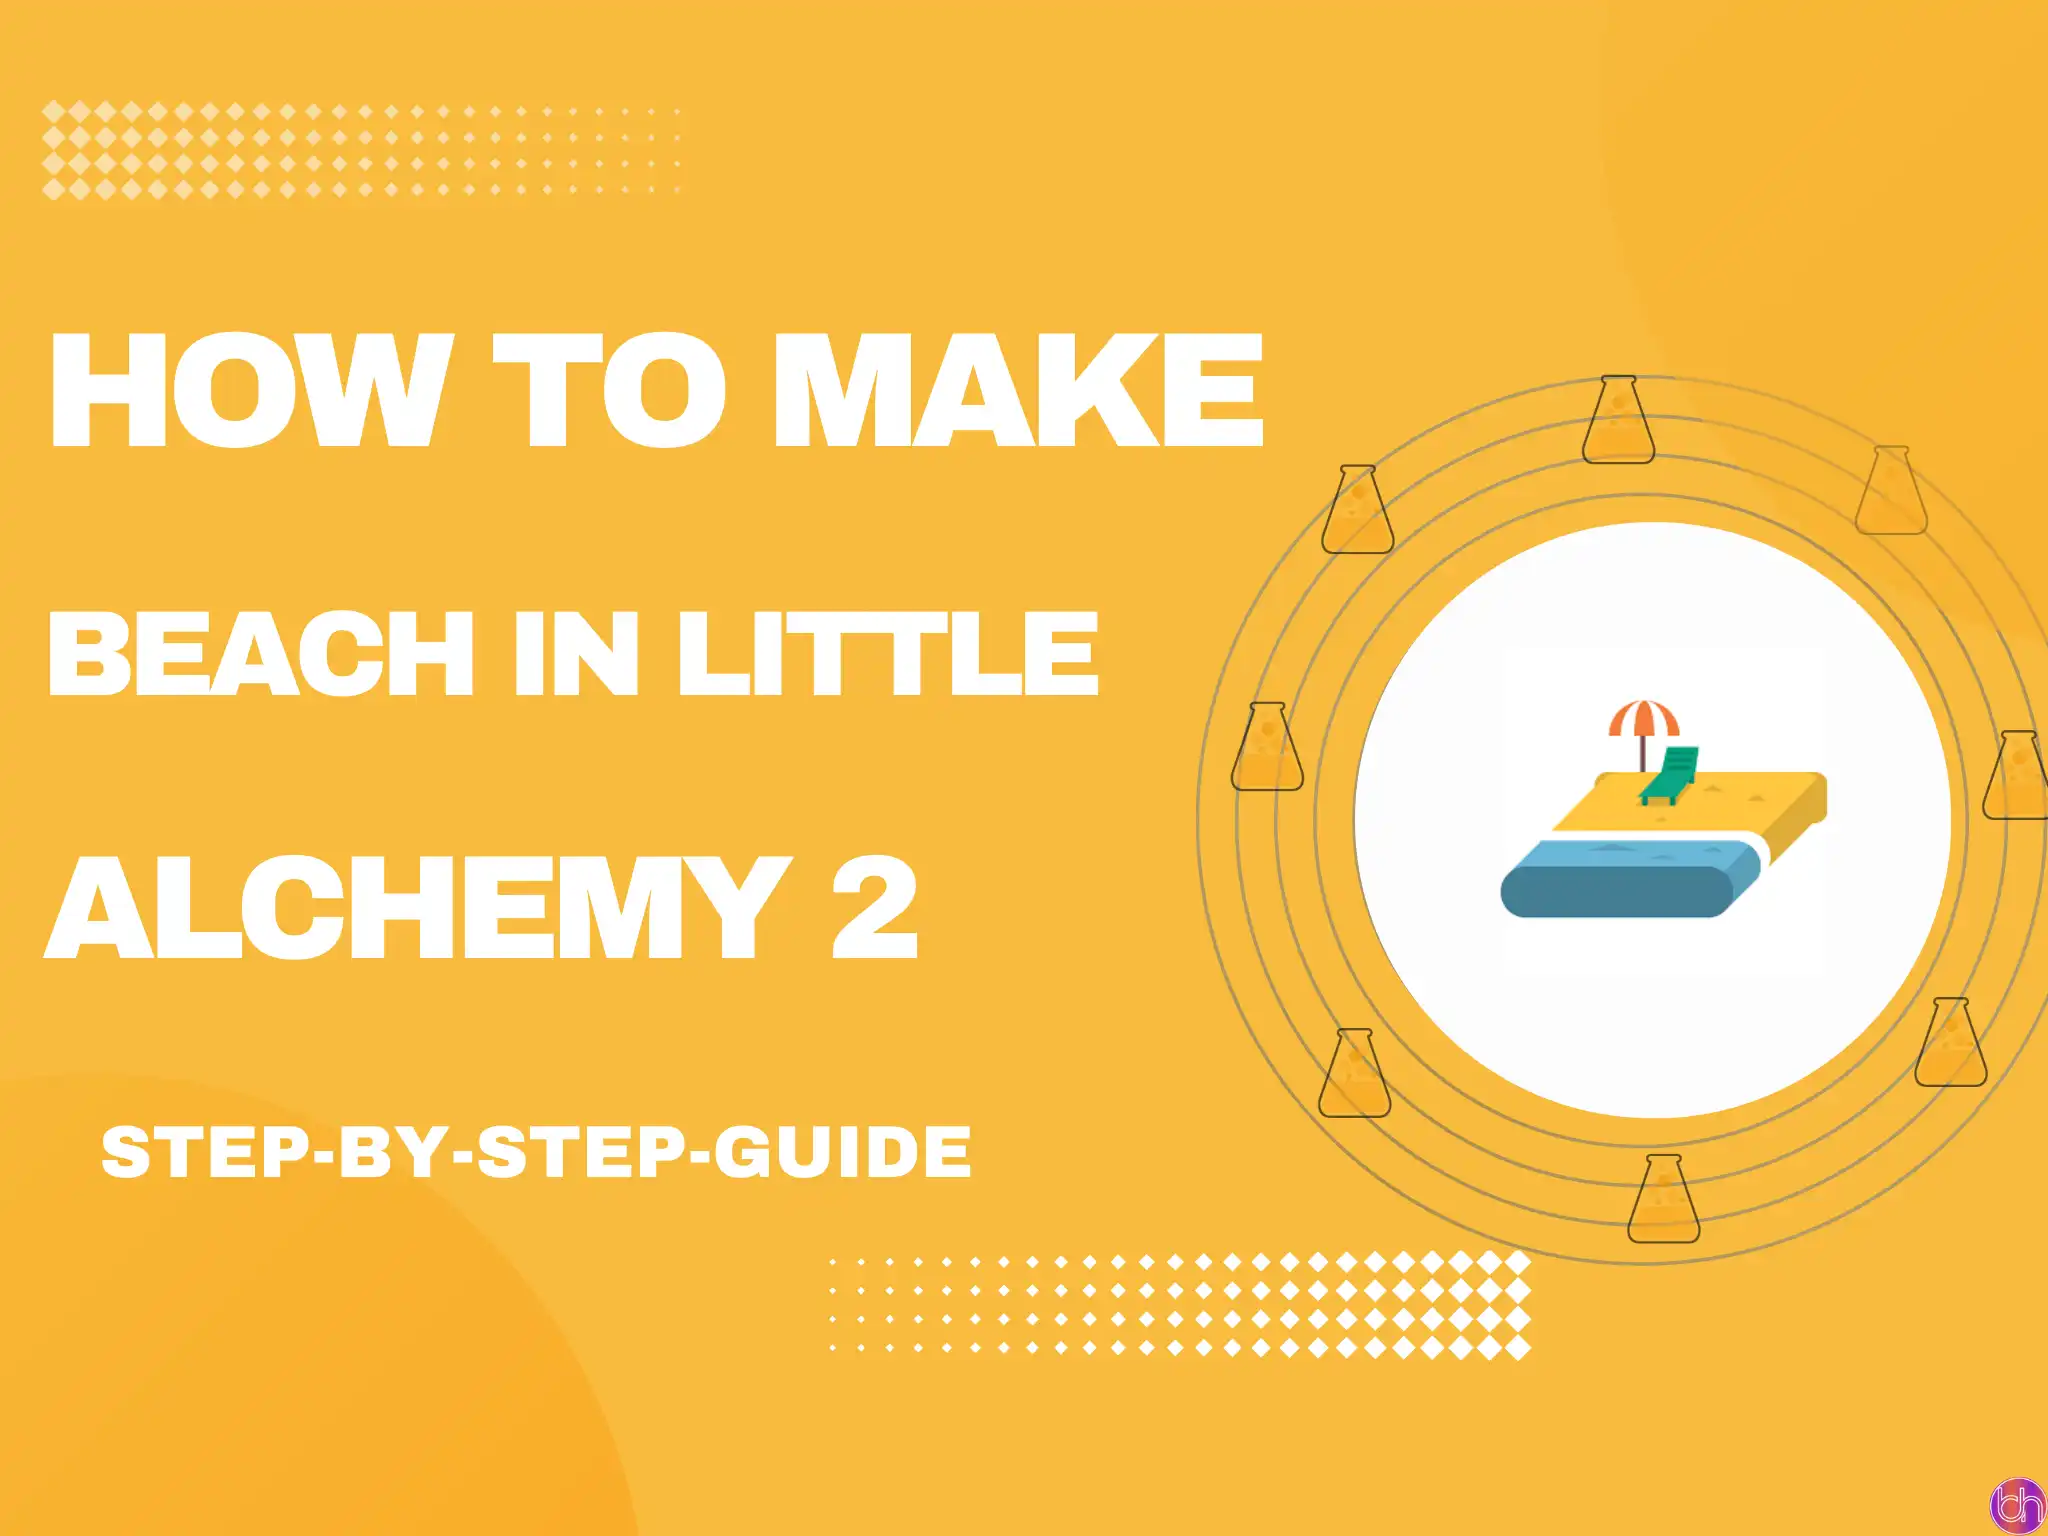 How to make Beach in Little Alchemy 2